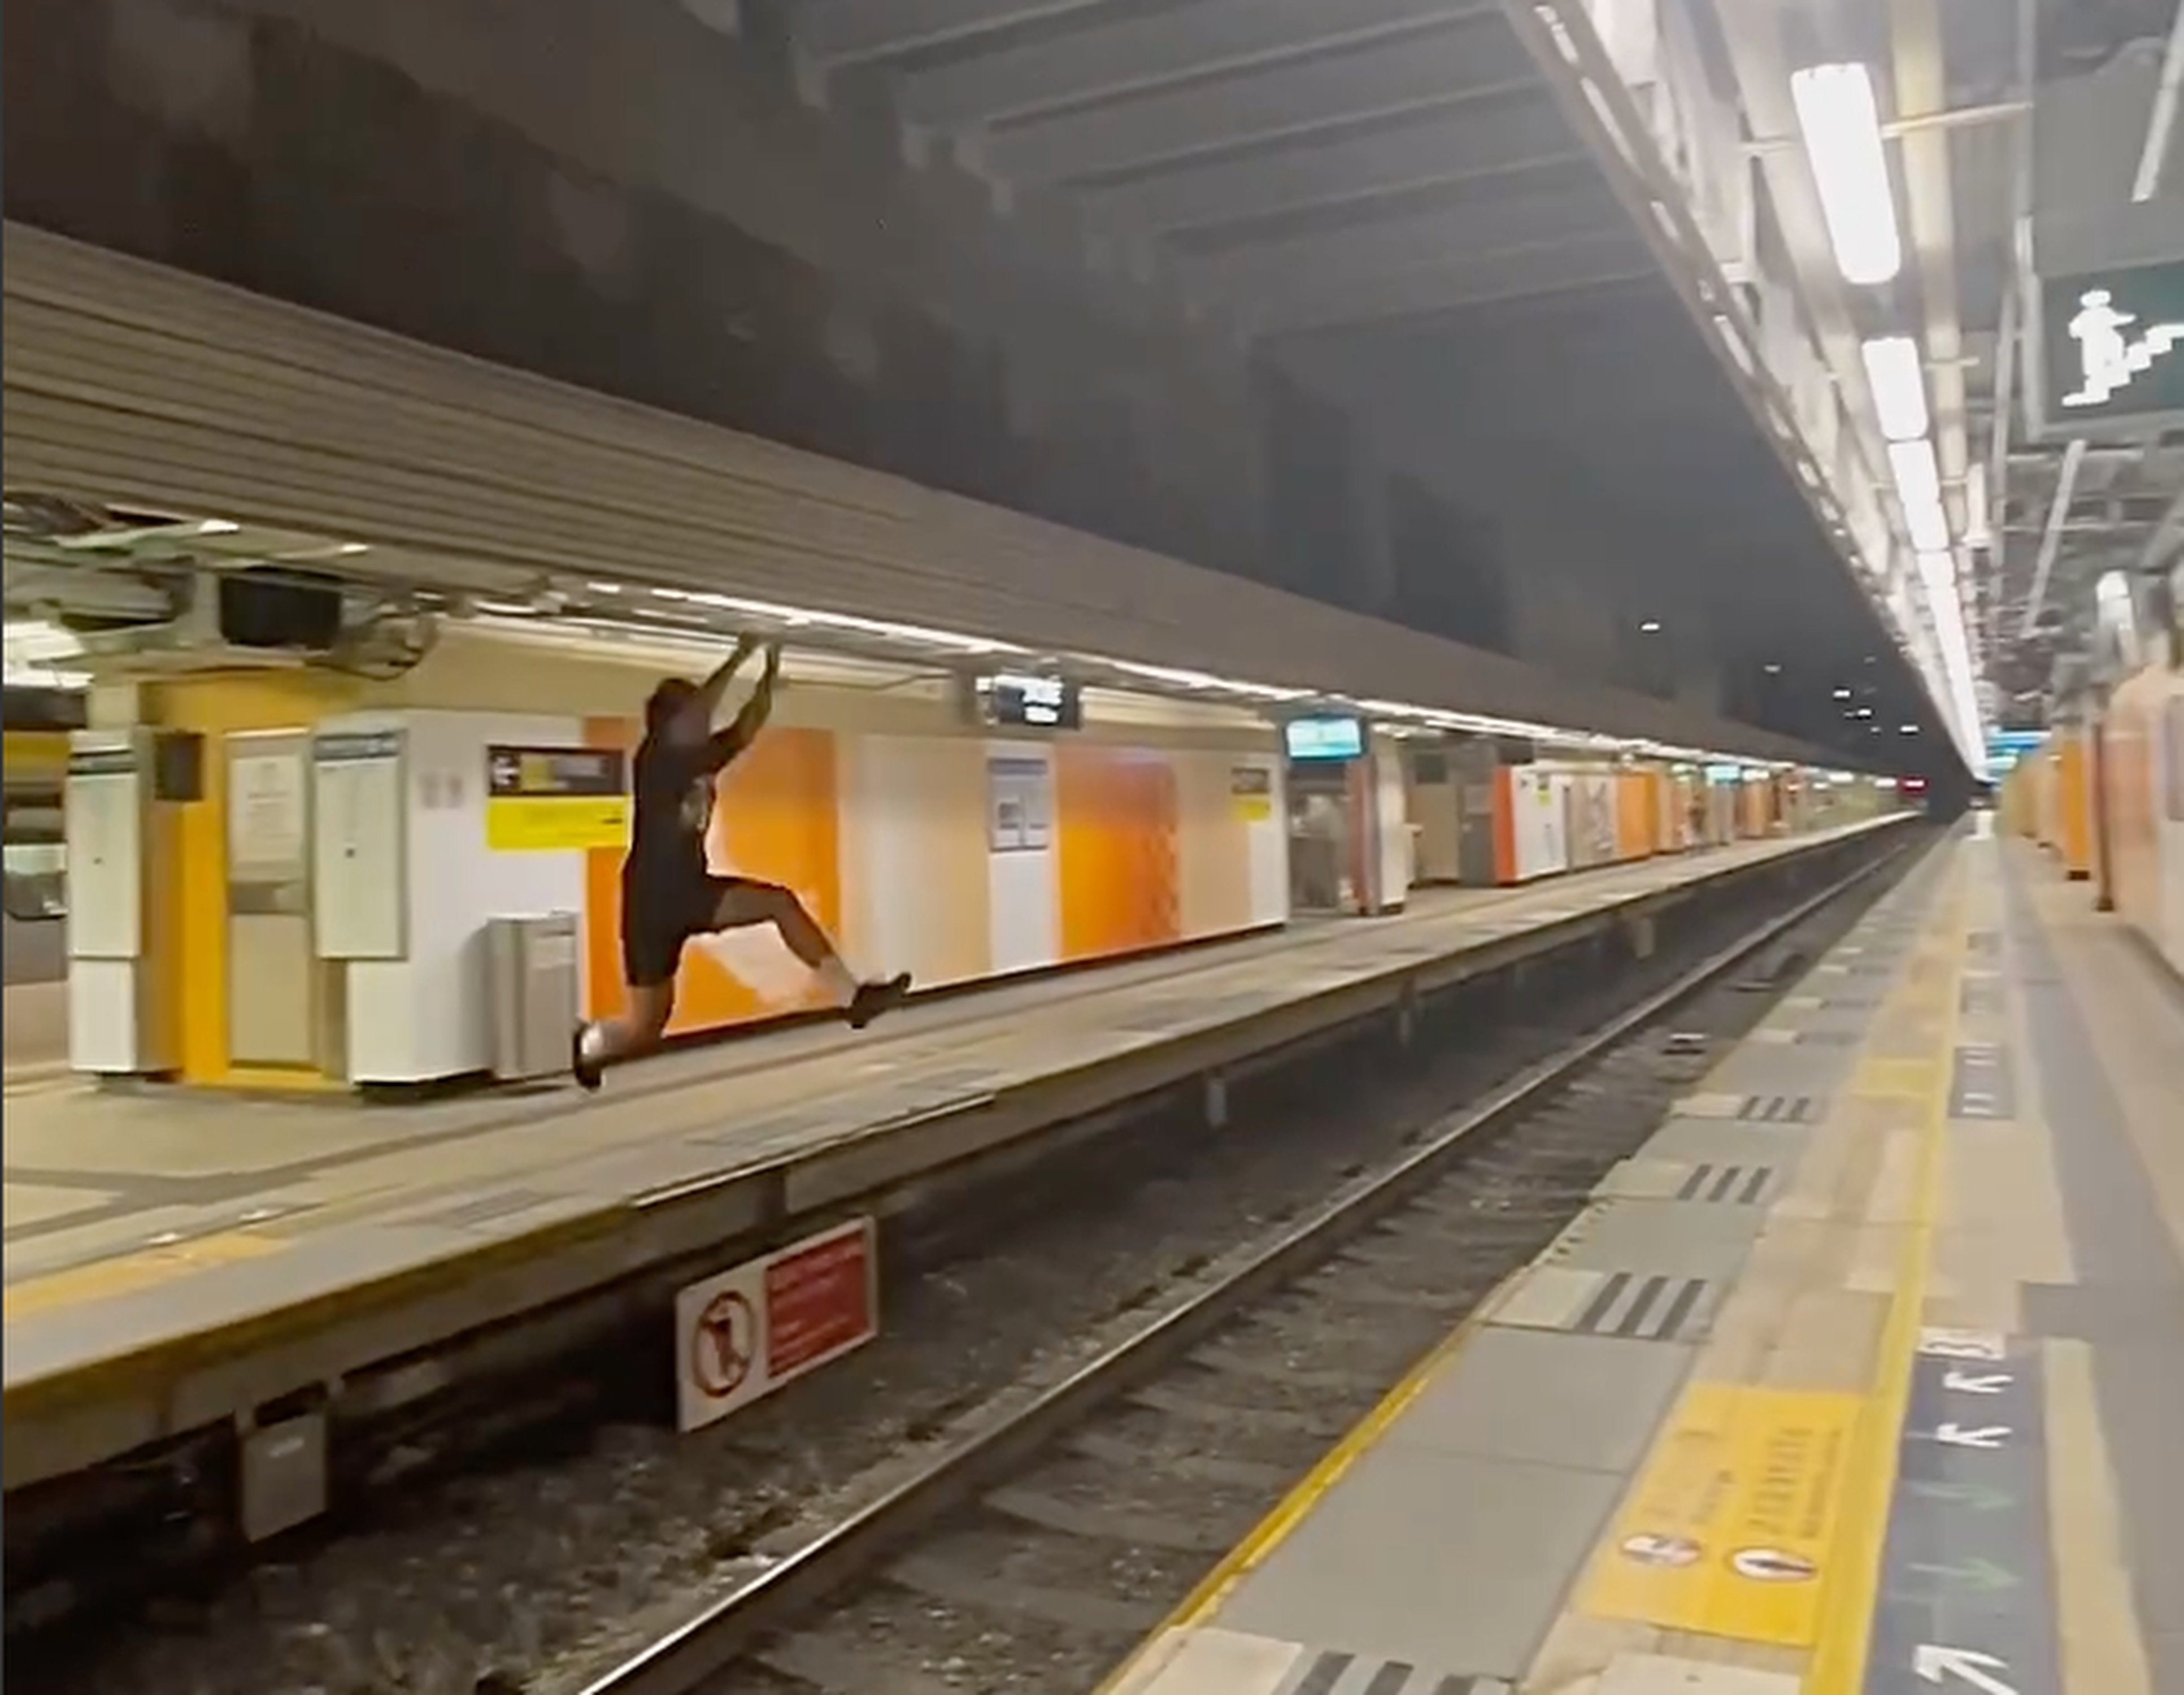 A screengrab shows a man jumping across platforms at Fo Tan station. Photo: Instagram